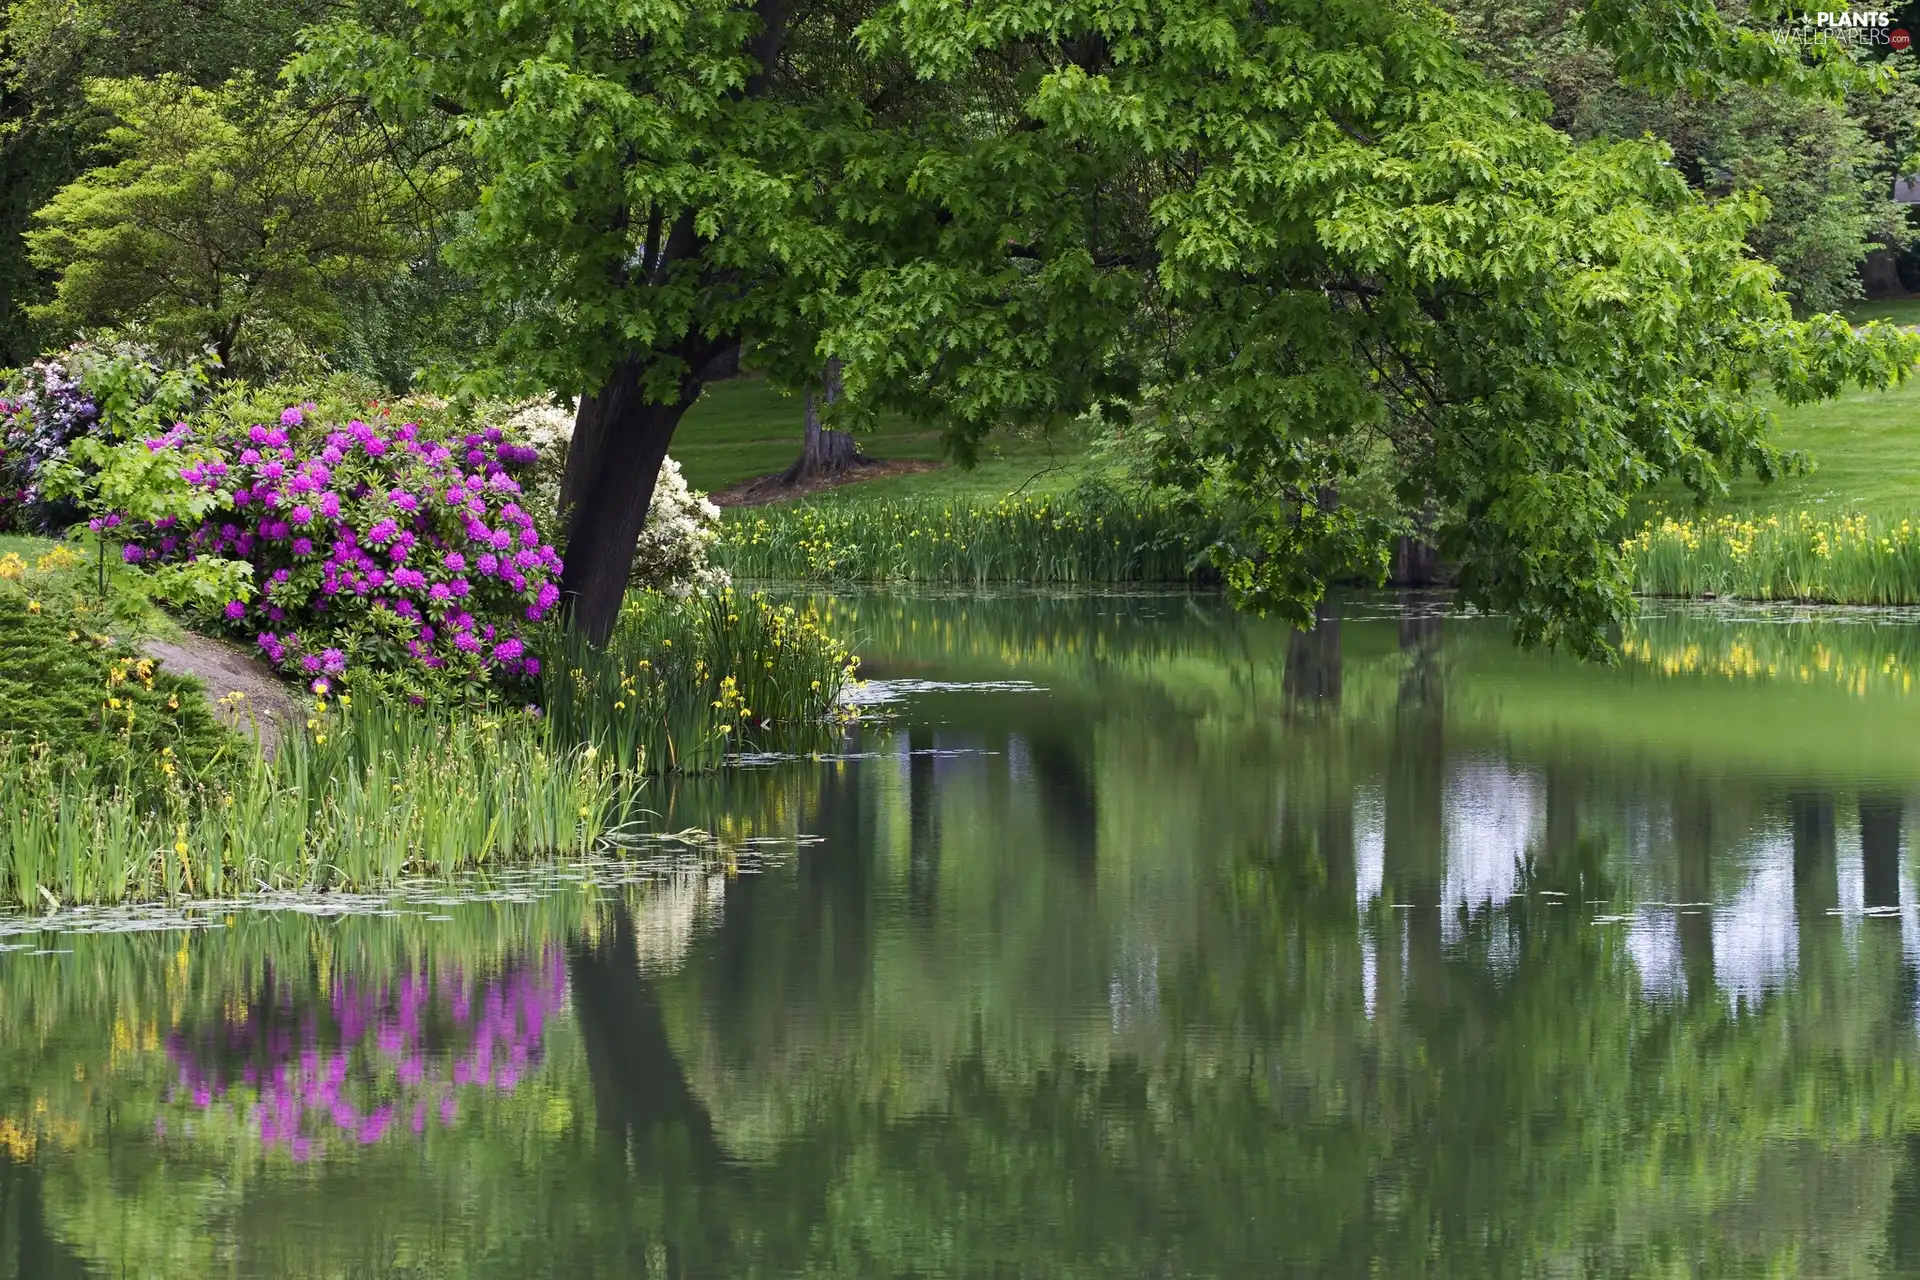 Pond - car, viewes, Flowers, trees